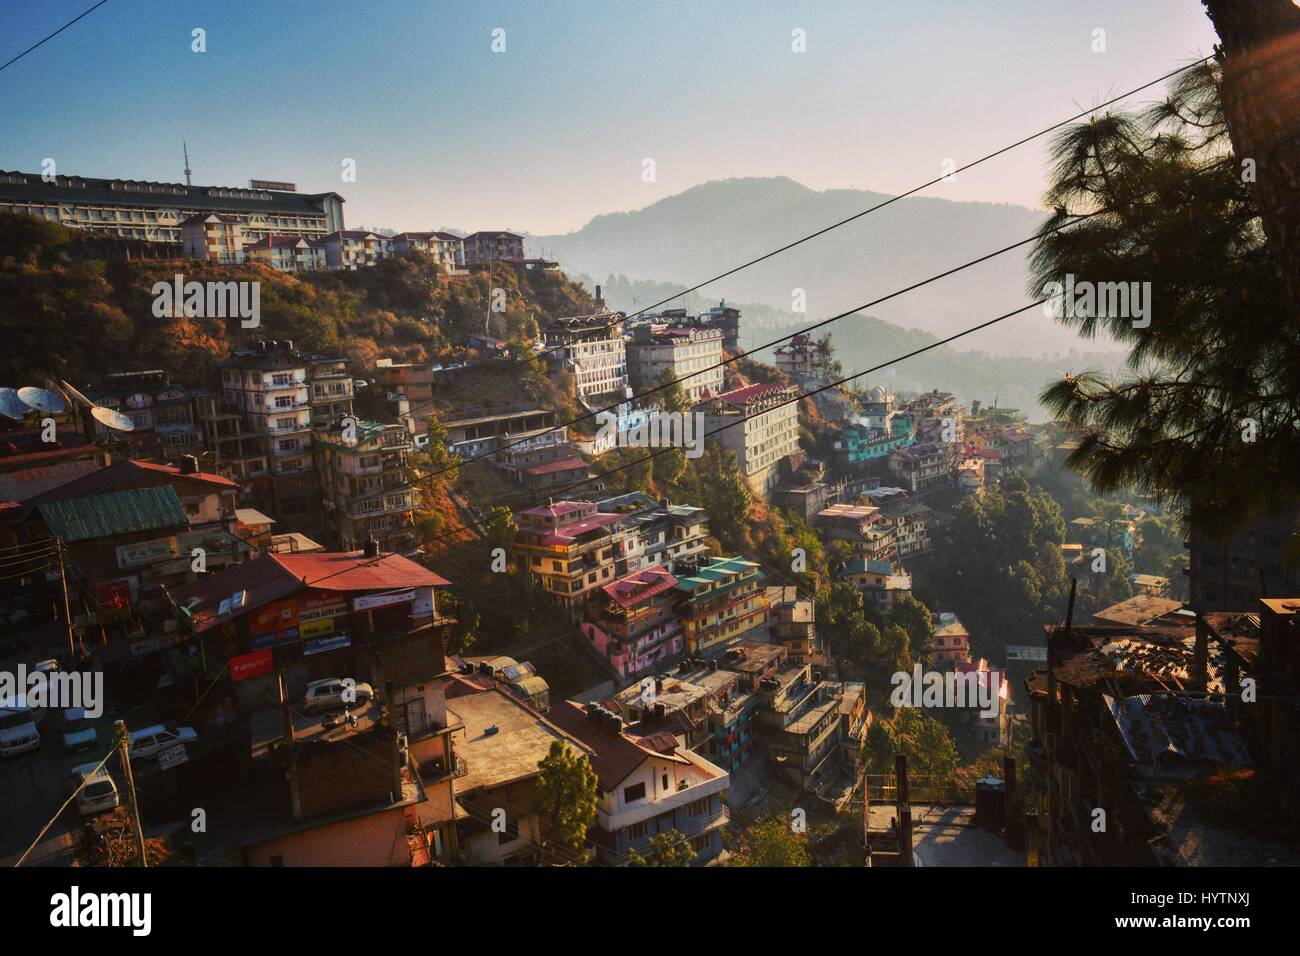 picture has been taken by a handheld camera. Place is fagu, shimla a beautiful hill station in india. A very good example of amature photography. Stock Photo